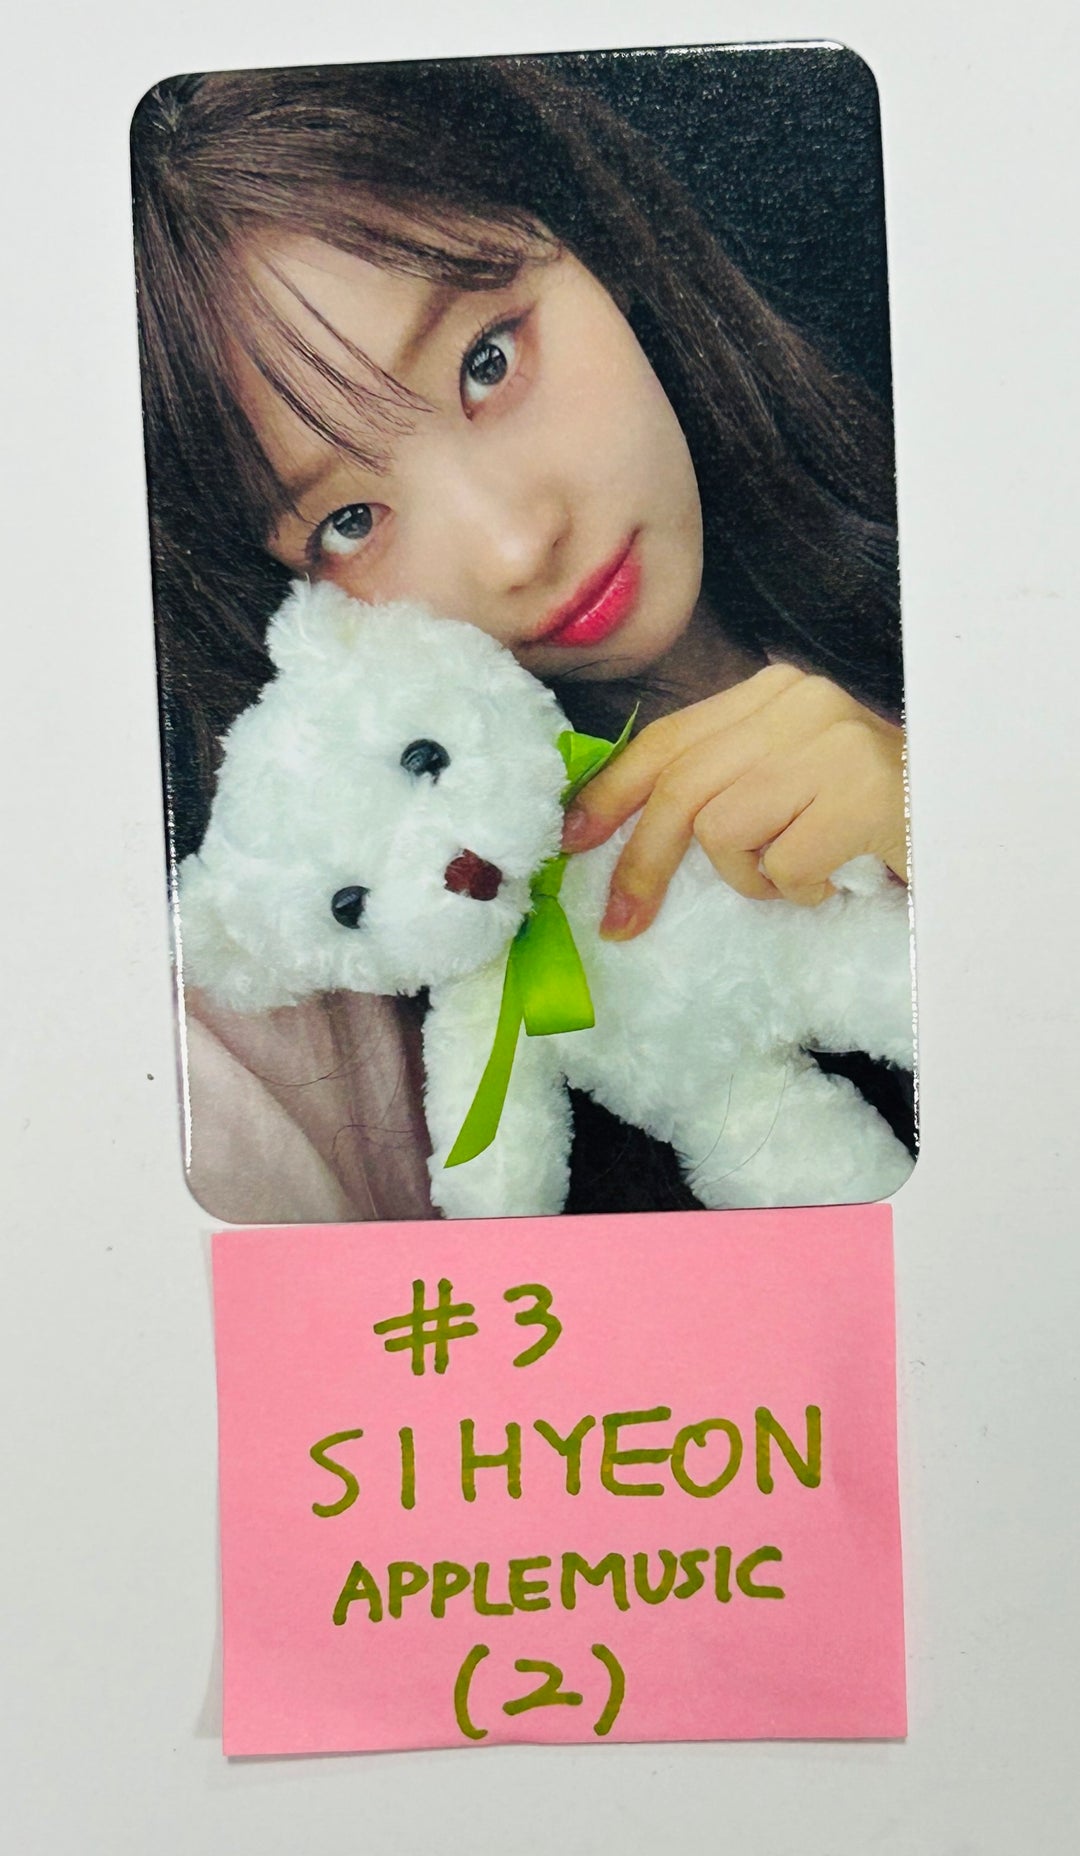 Everglow "ZOMBIE " - Apple Music Fansign Event Photocard [24.6.20]